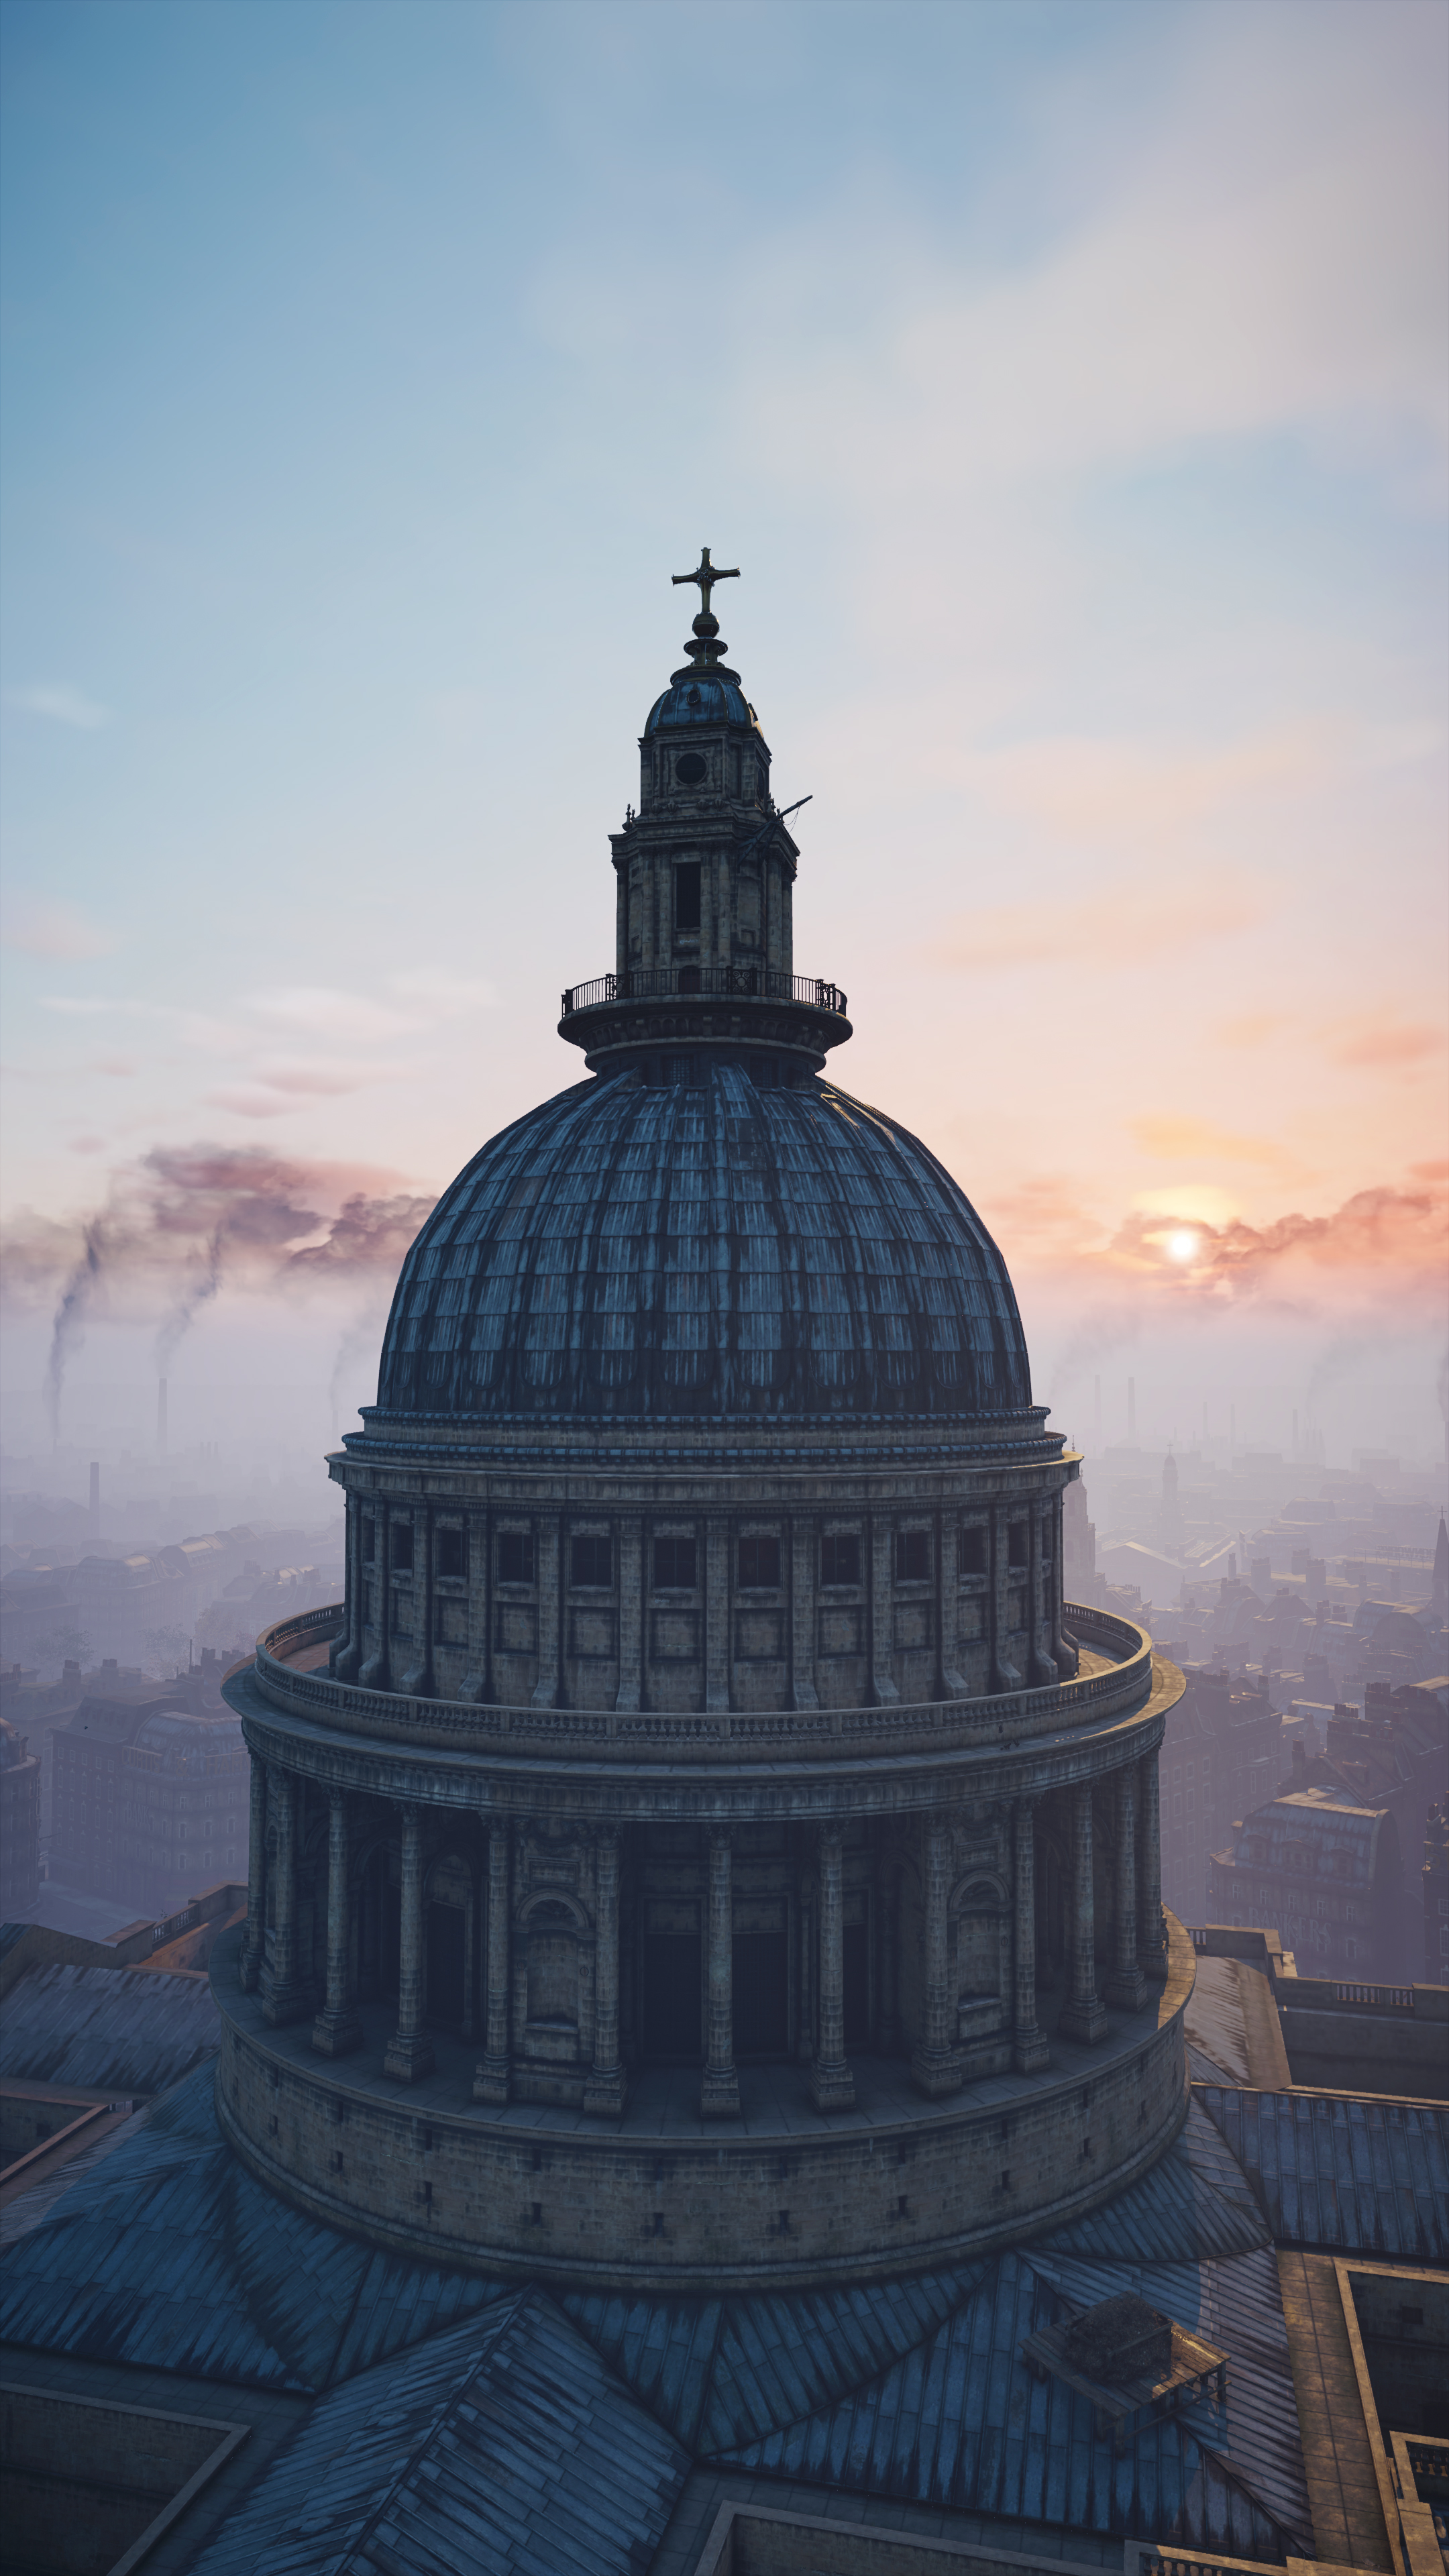 Assassin's Creed: Syndicate Picture by CarlWEX